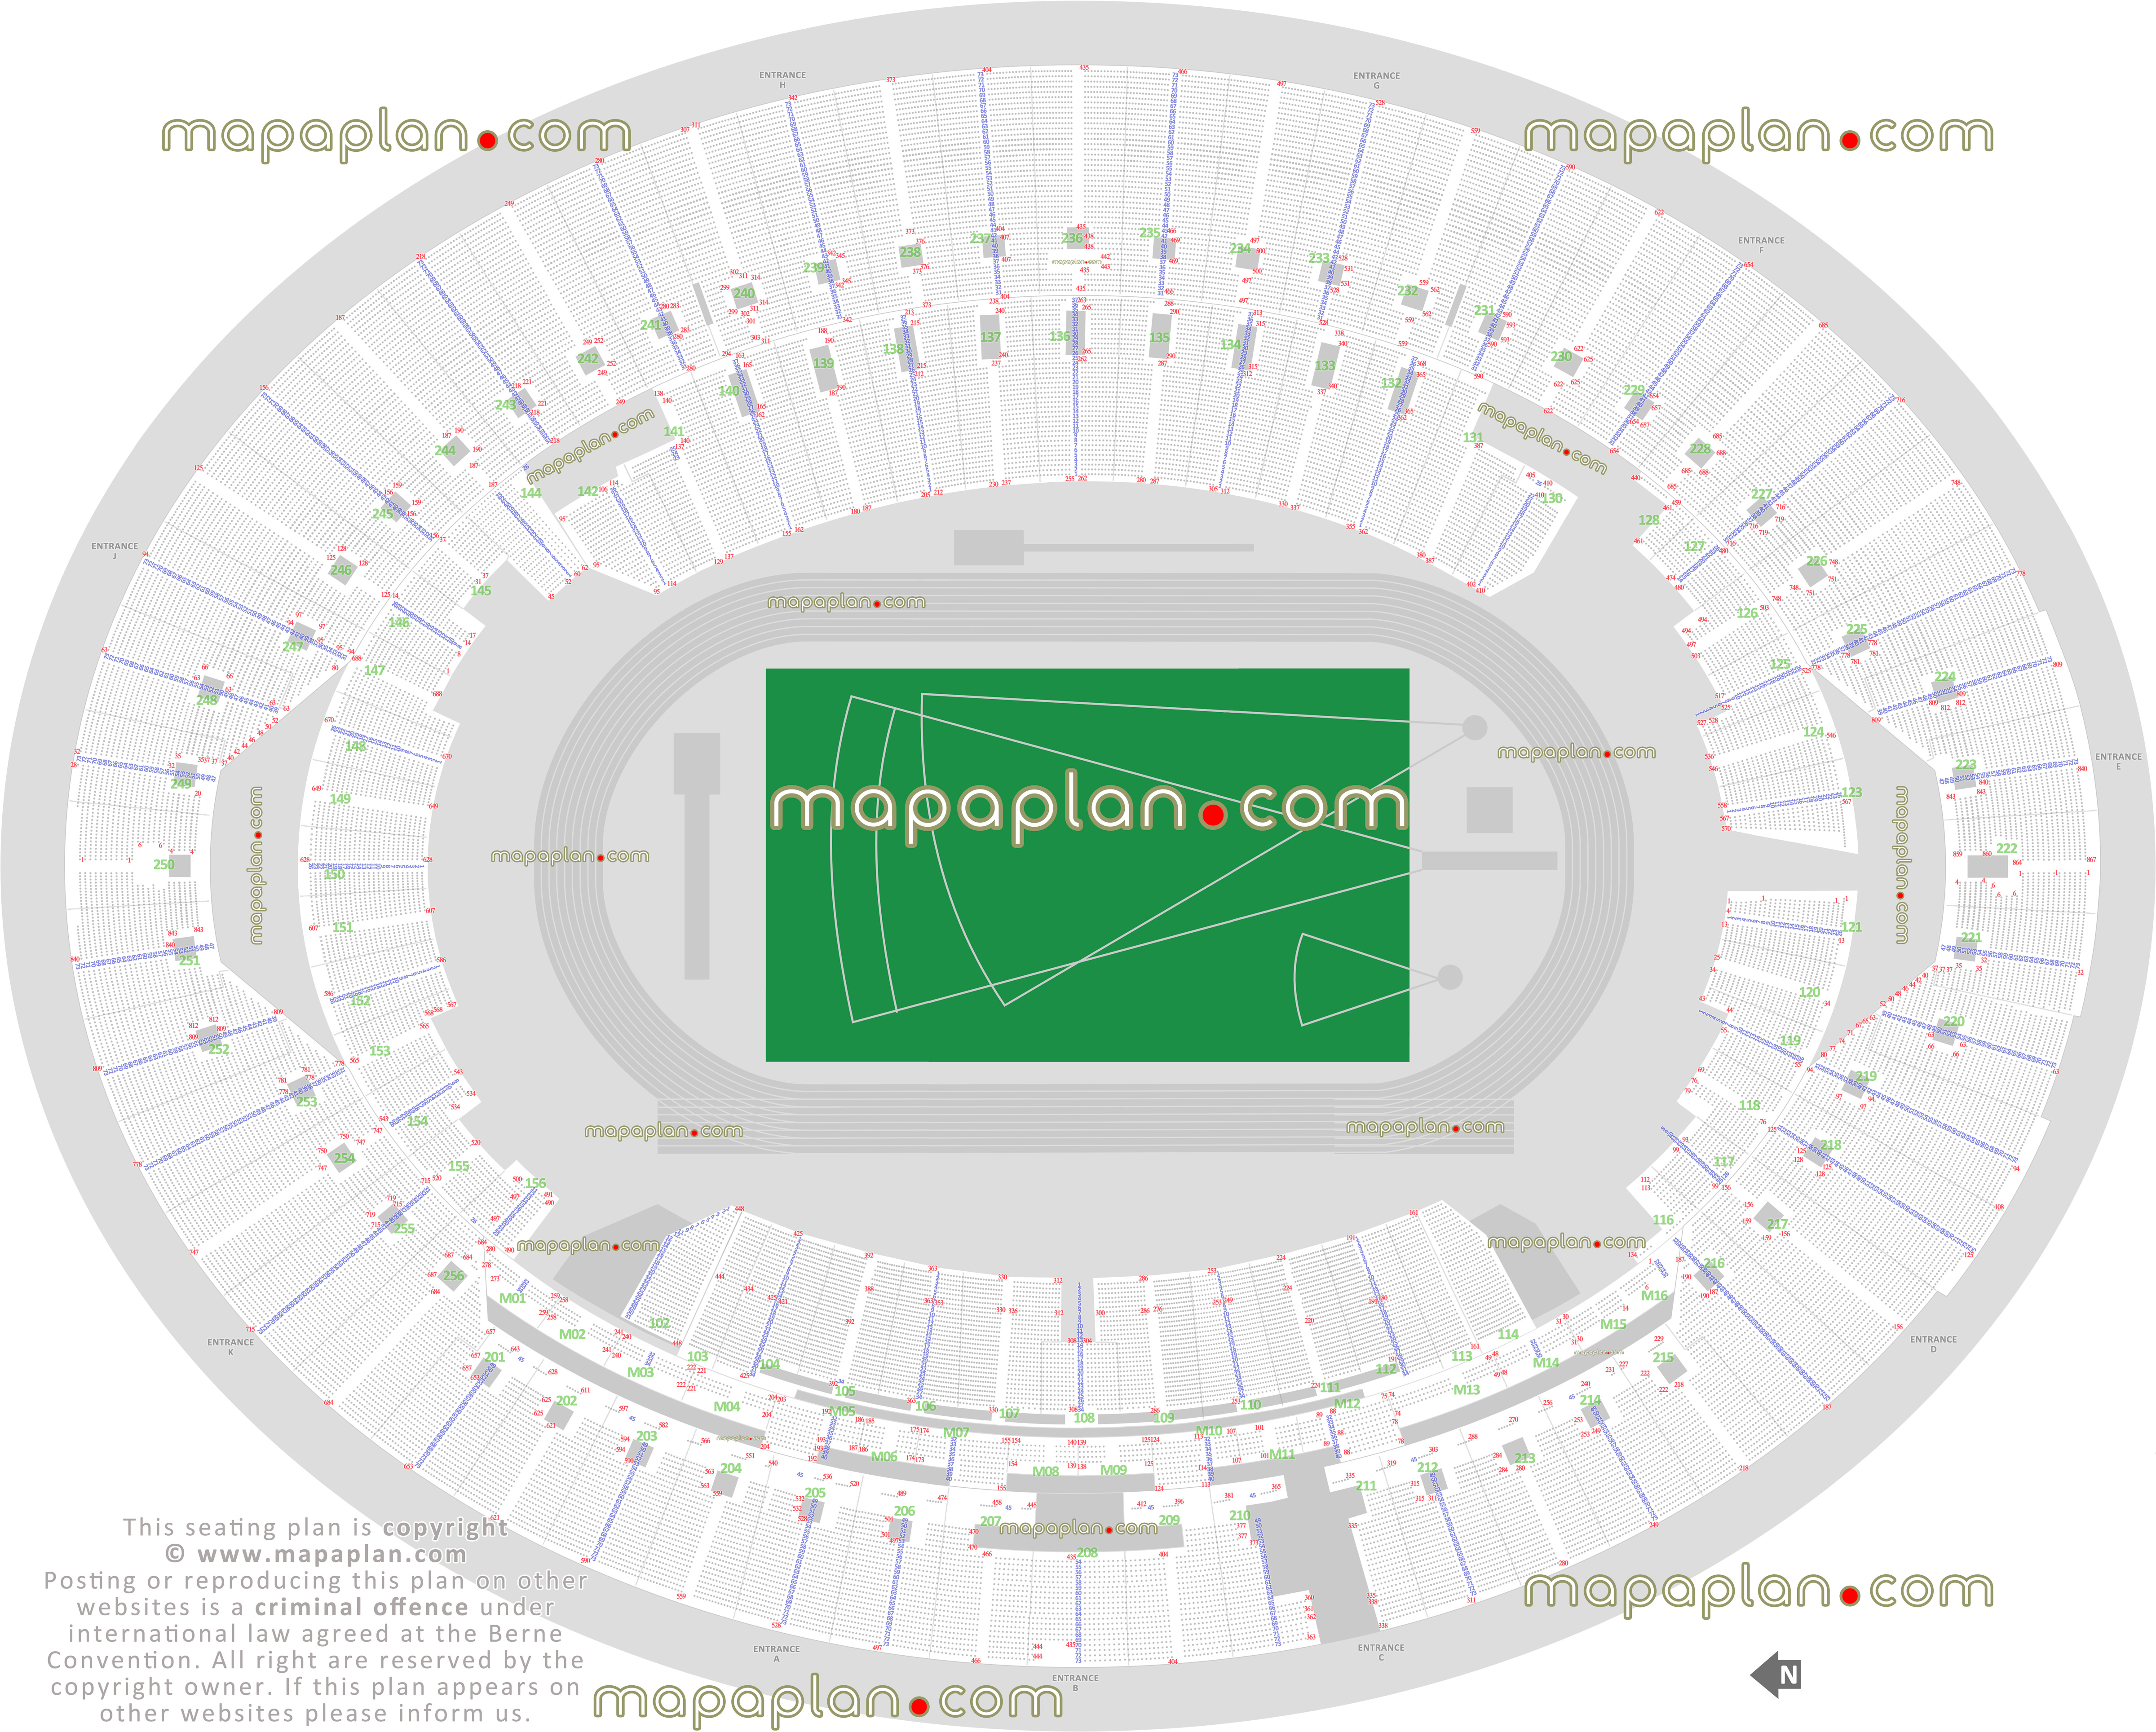 London Stadium (West Ham United Olympic Park) seating plan athletics arena interactive seating checker plan lower tier club london upper tier entrances arrangement ticket prices sections review diagram